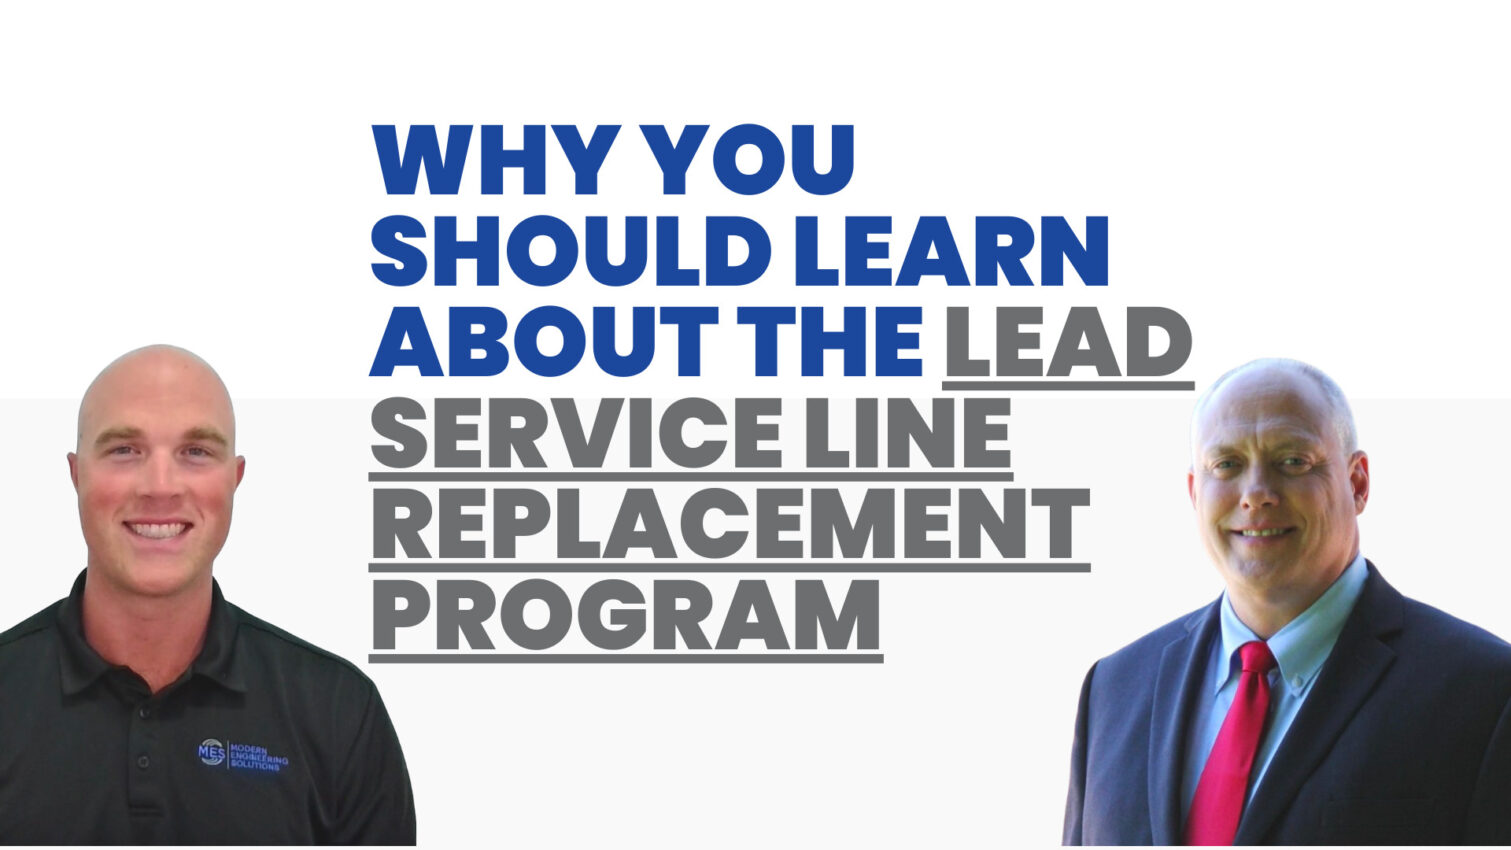 Why You Should Learn About the Lead Service Line Replacement Program